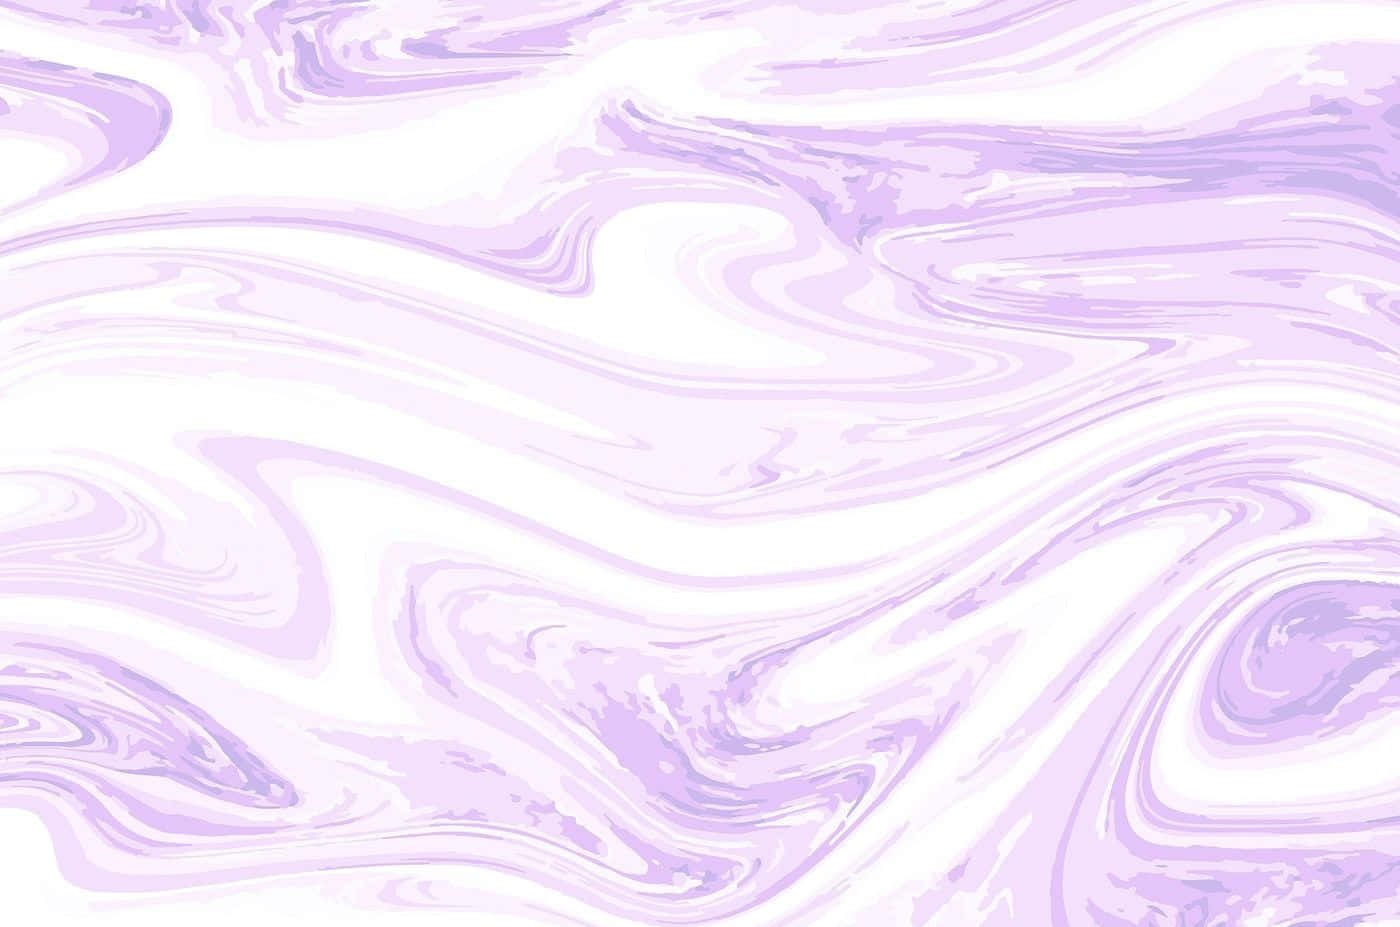 100+] Purple Marble Wallpapers | Wallpapers.com